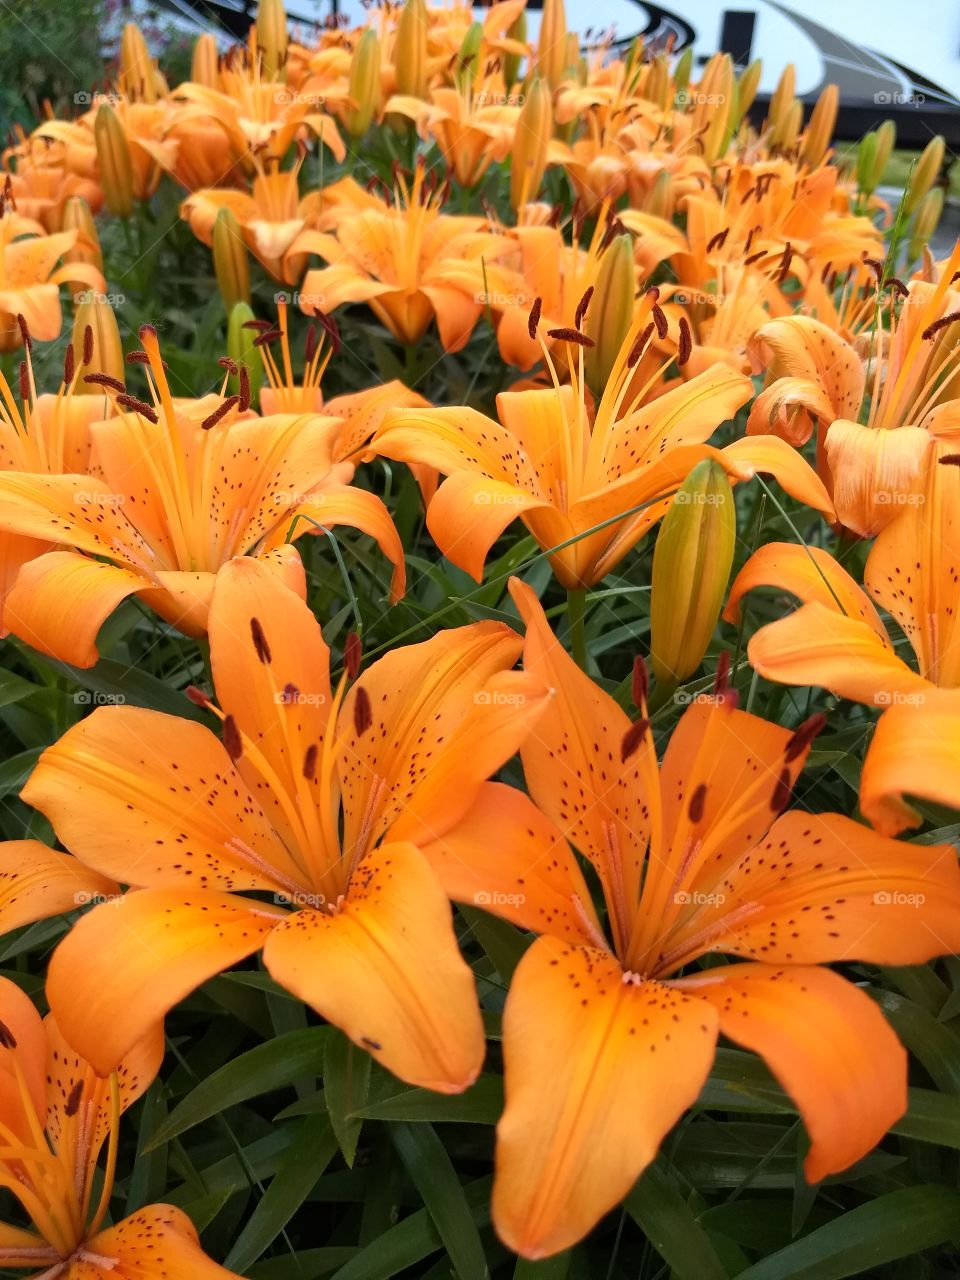 I love these lillies in my front yard.